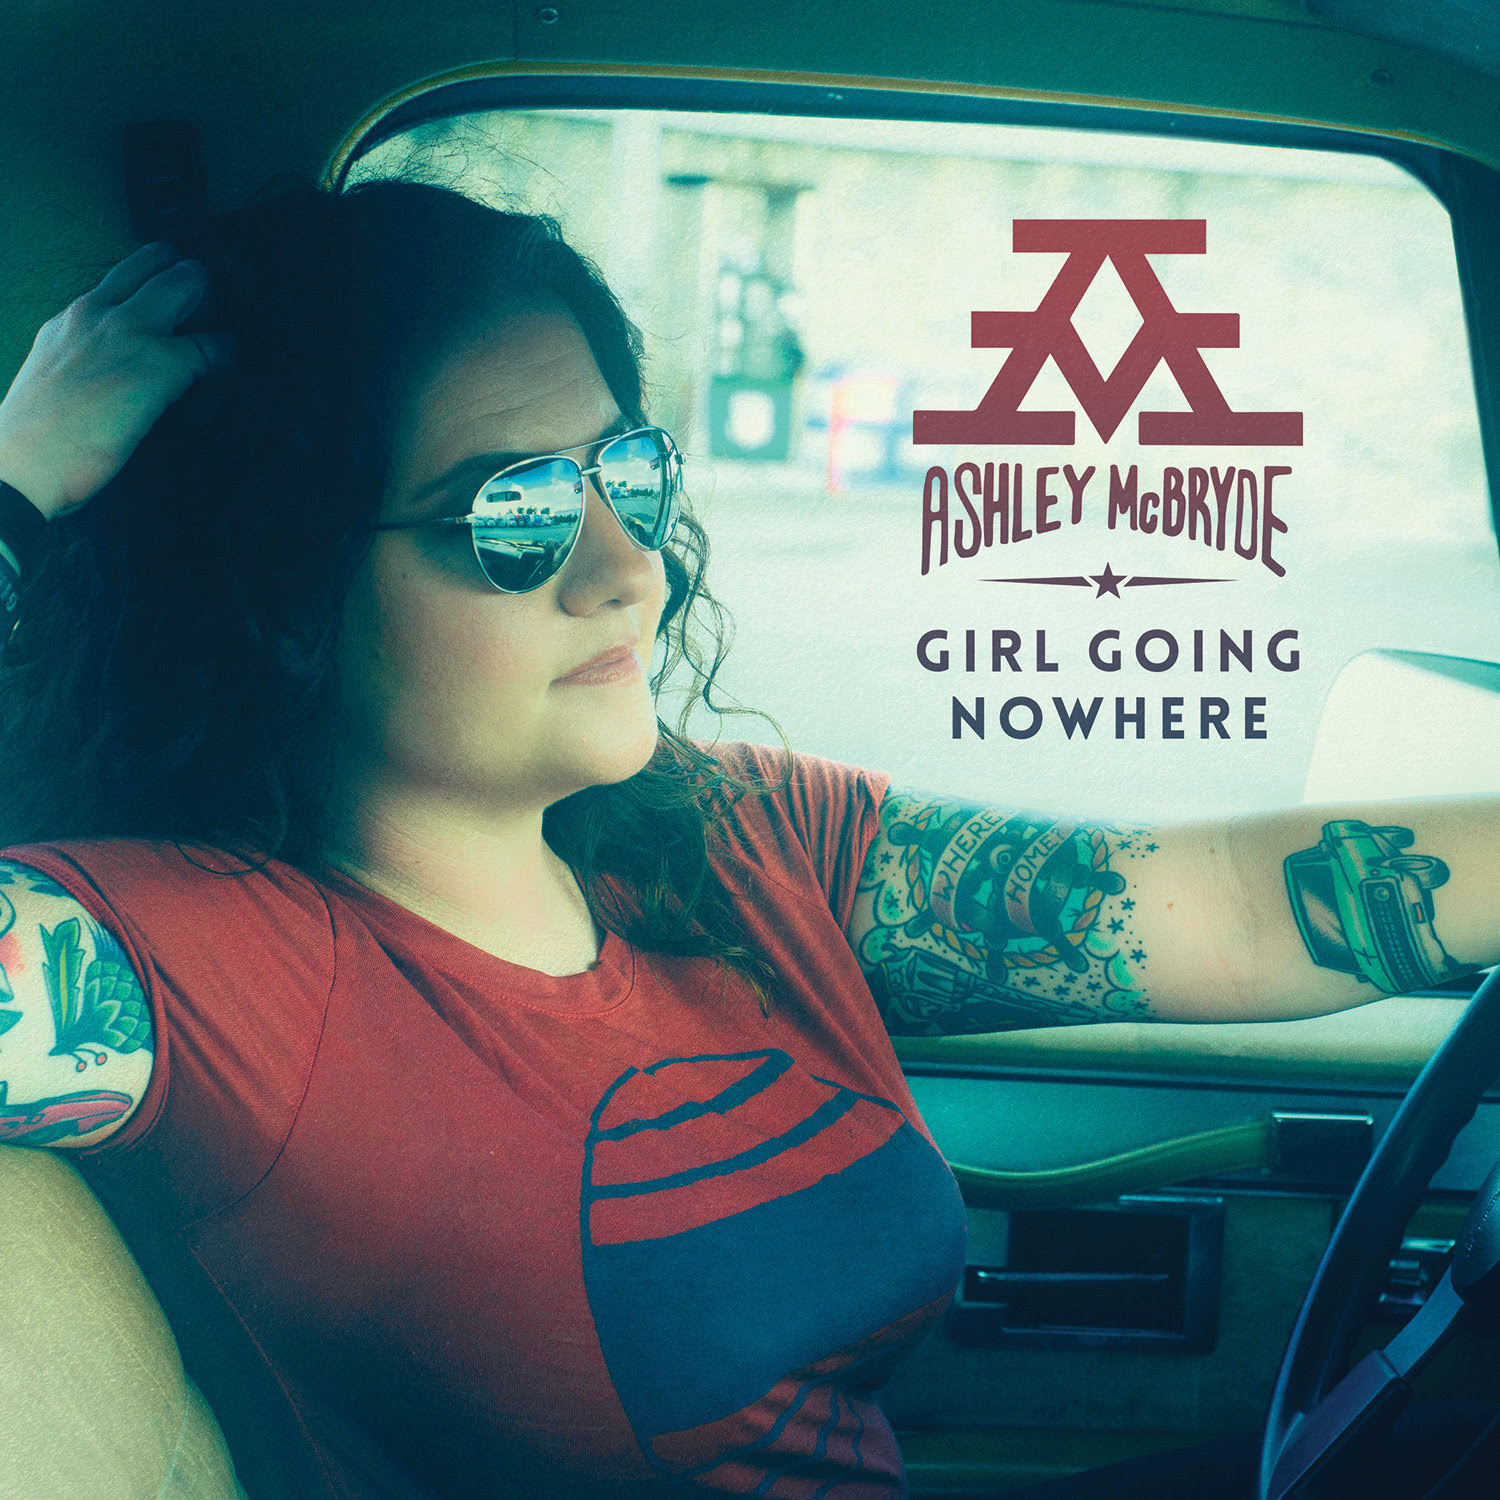 Ashley McBryde Reveals Details For Upcoming Album “Girl Going Nowhere”